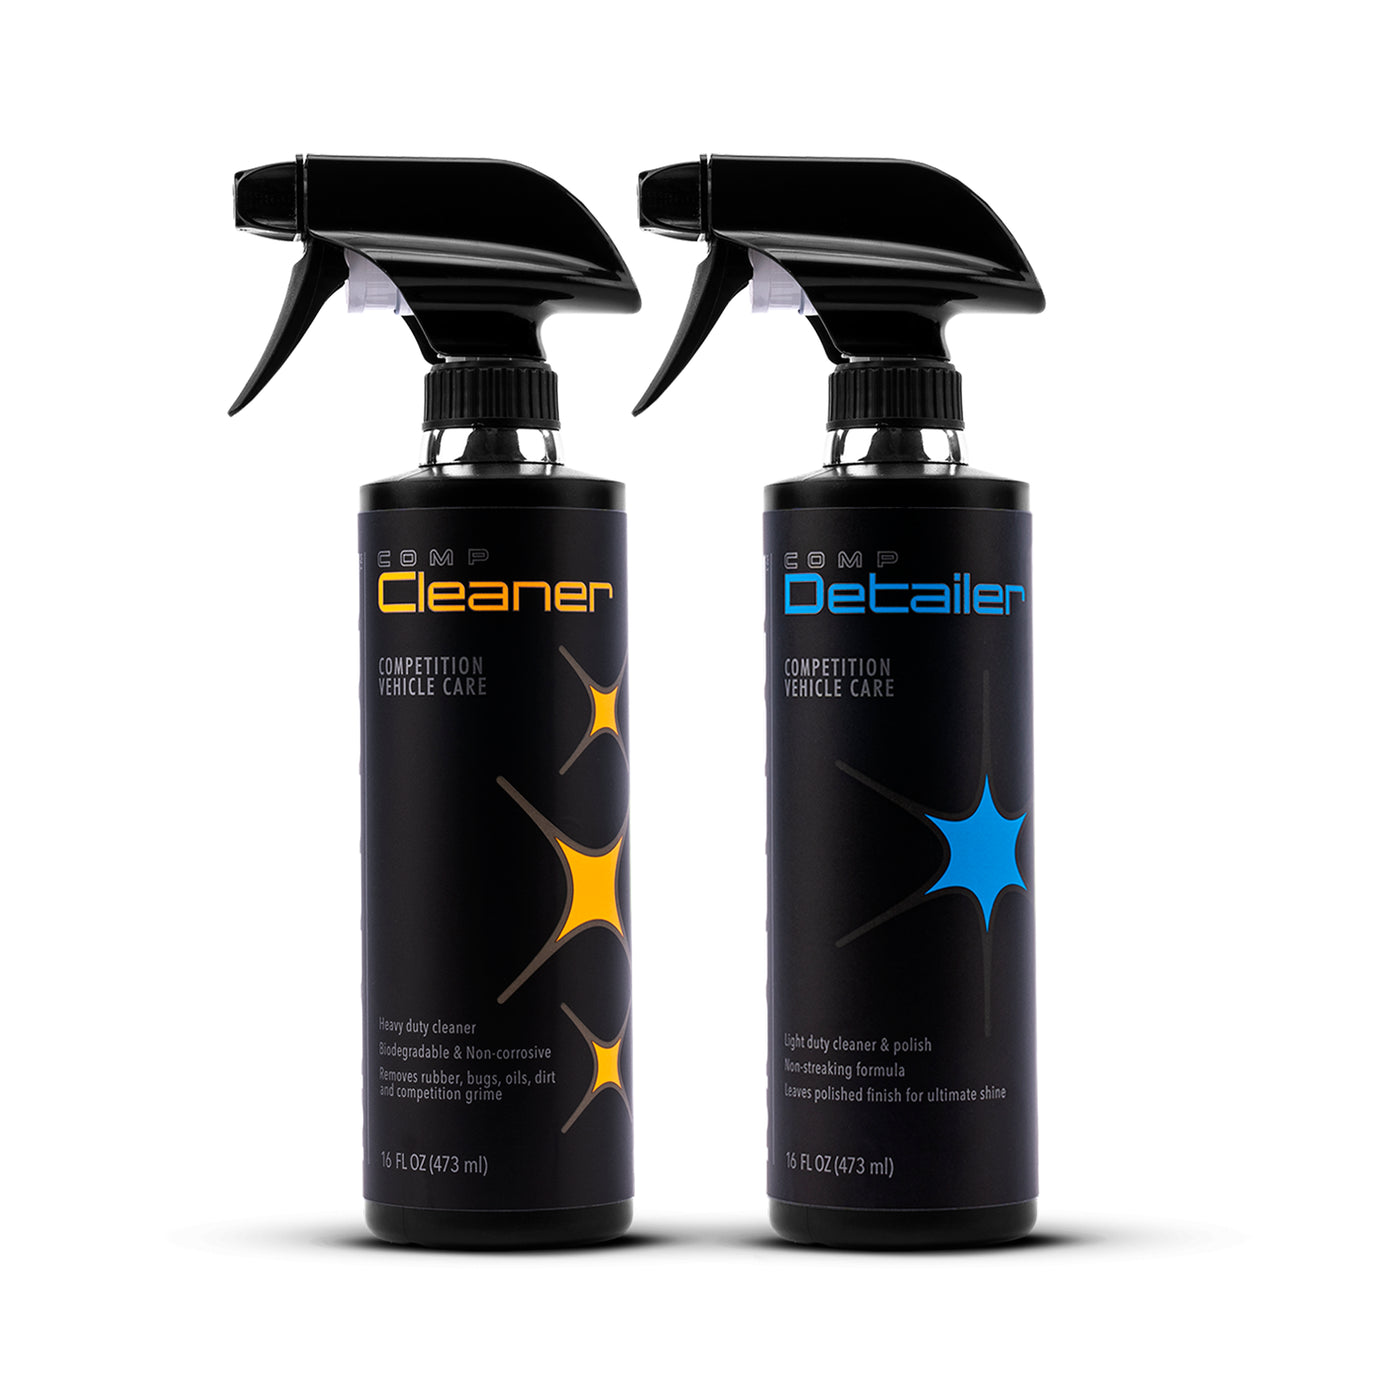 [Vehicle Care] Molecule Cleaner and Detailer Kit 16 oz. (473ml)